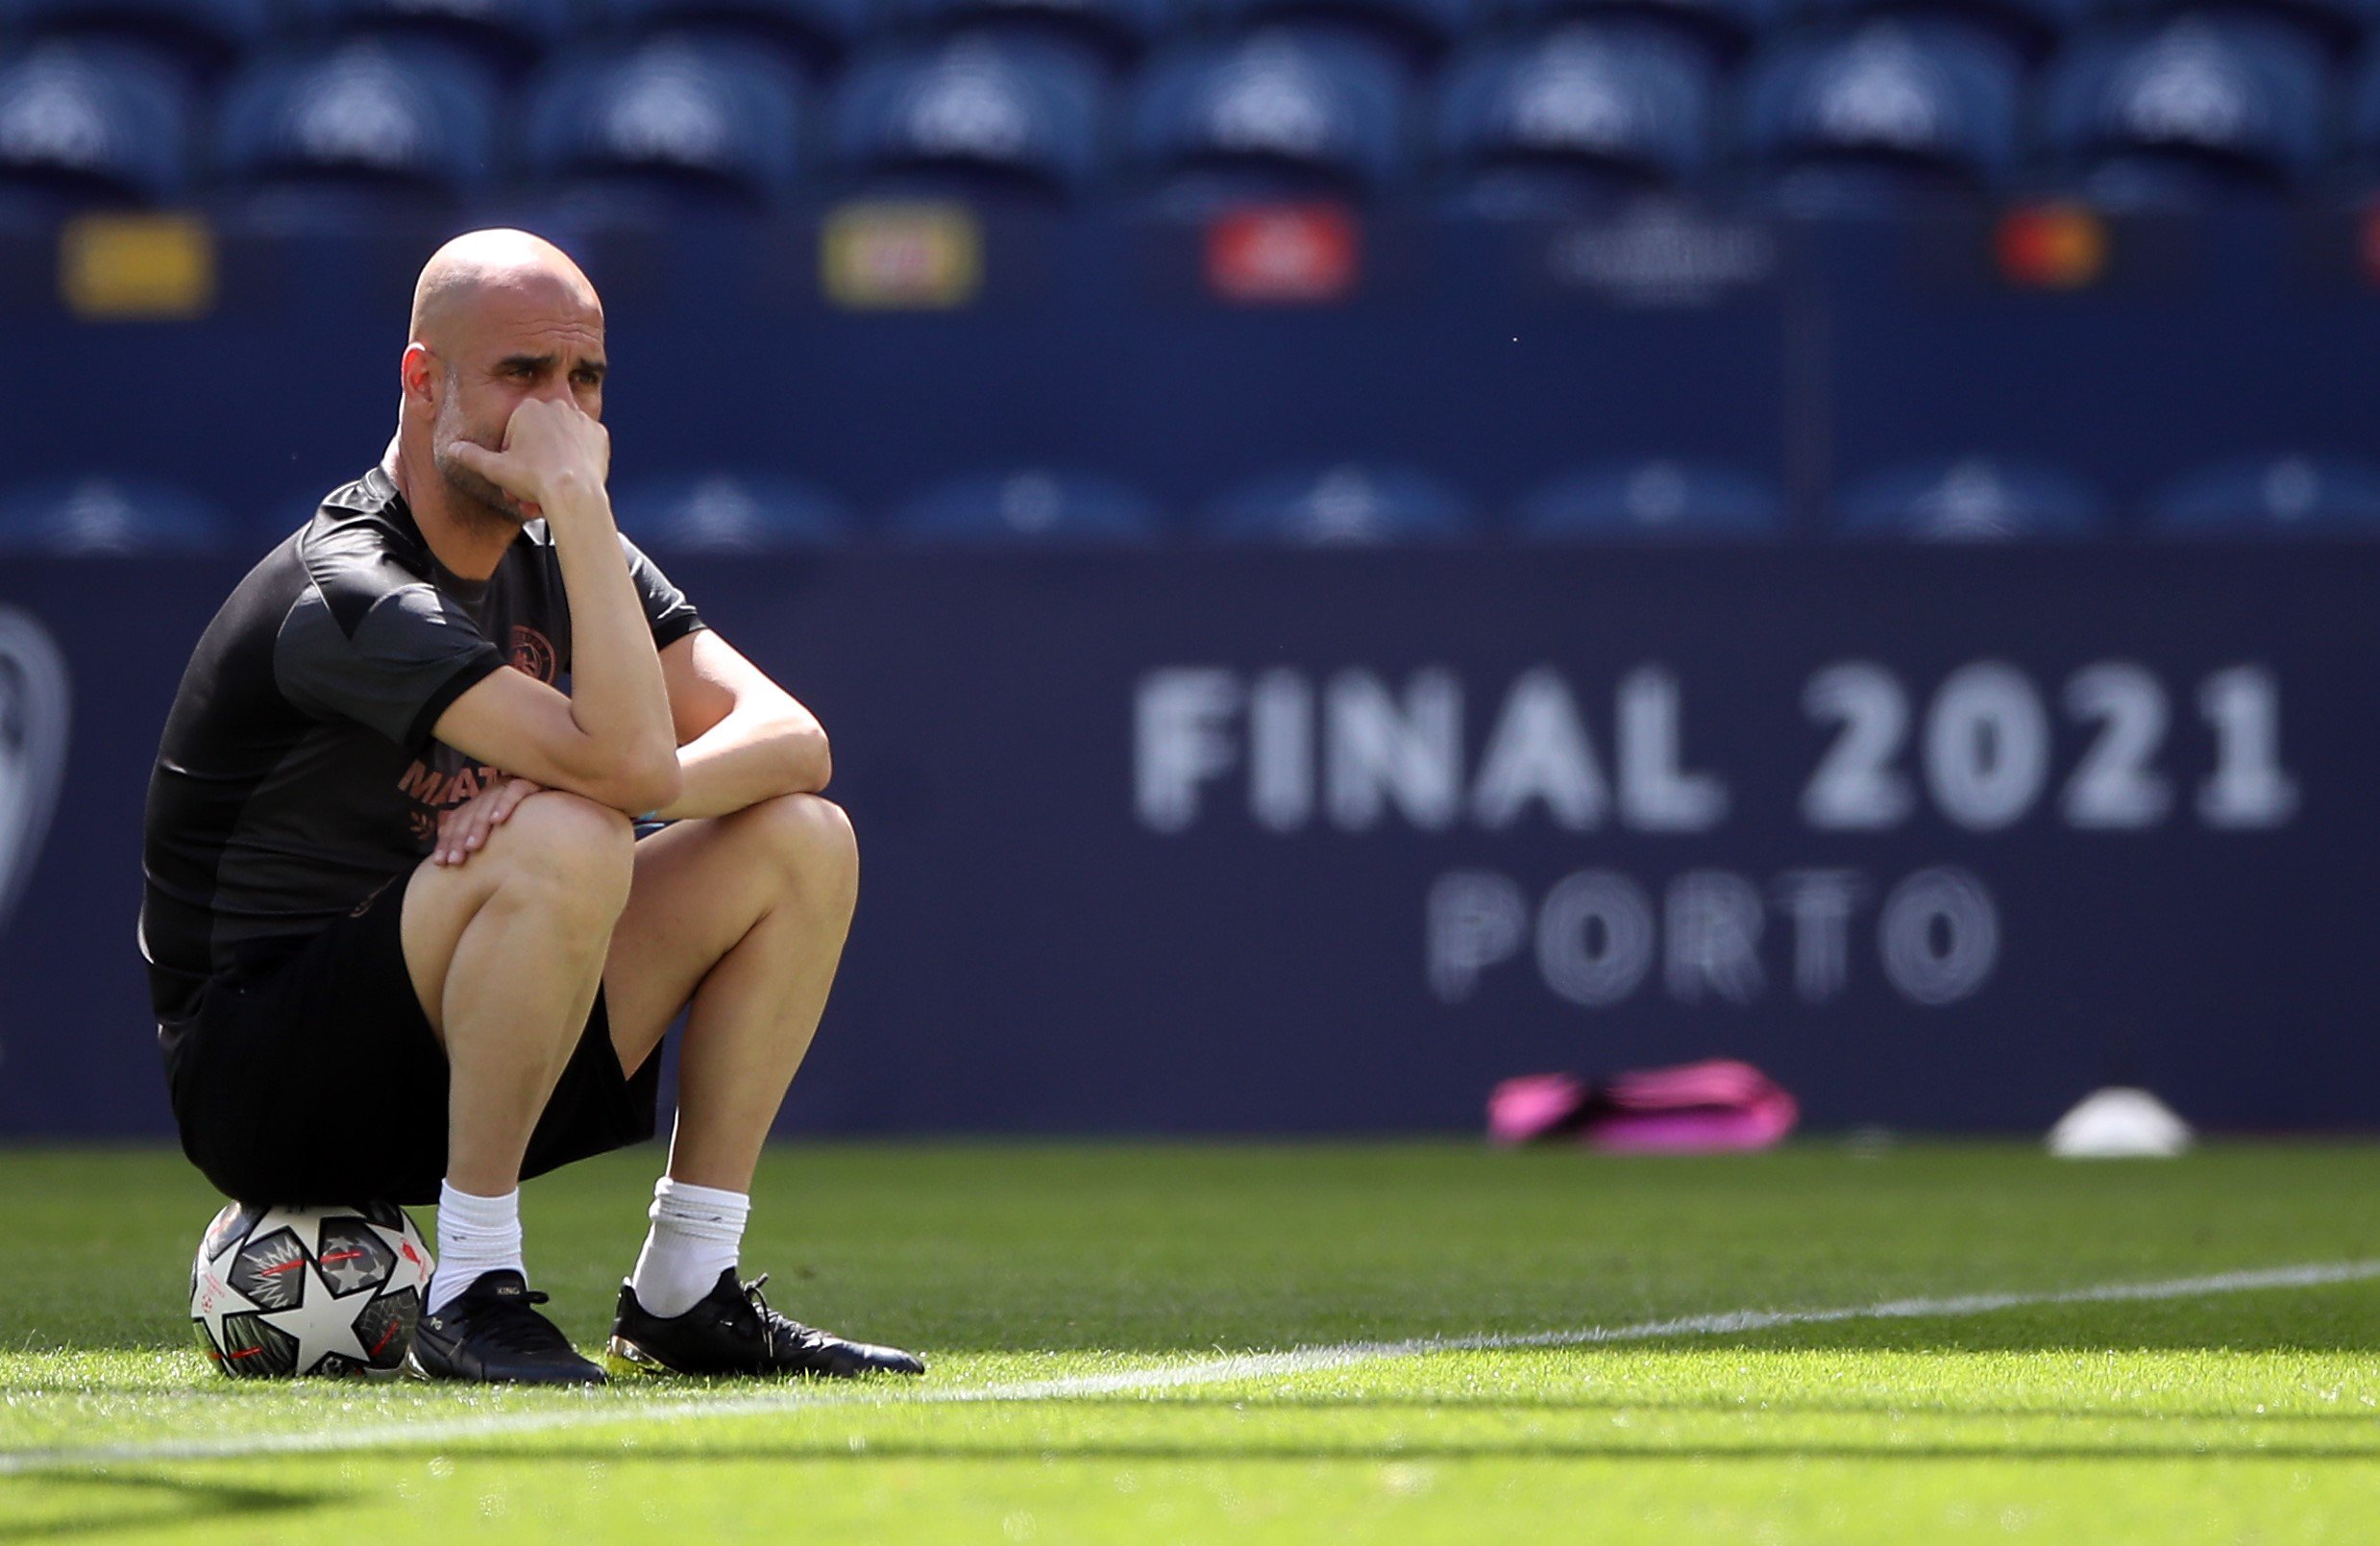 Guardiola punctures Barça's hopes: "I'm staying at City, for sure"